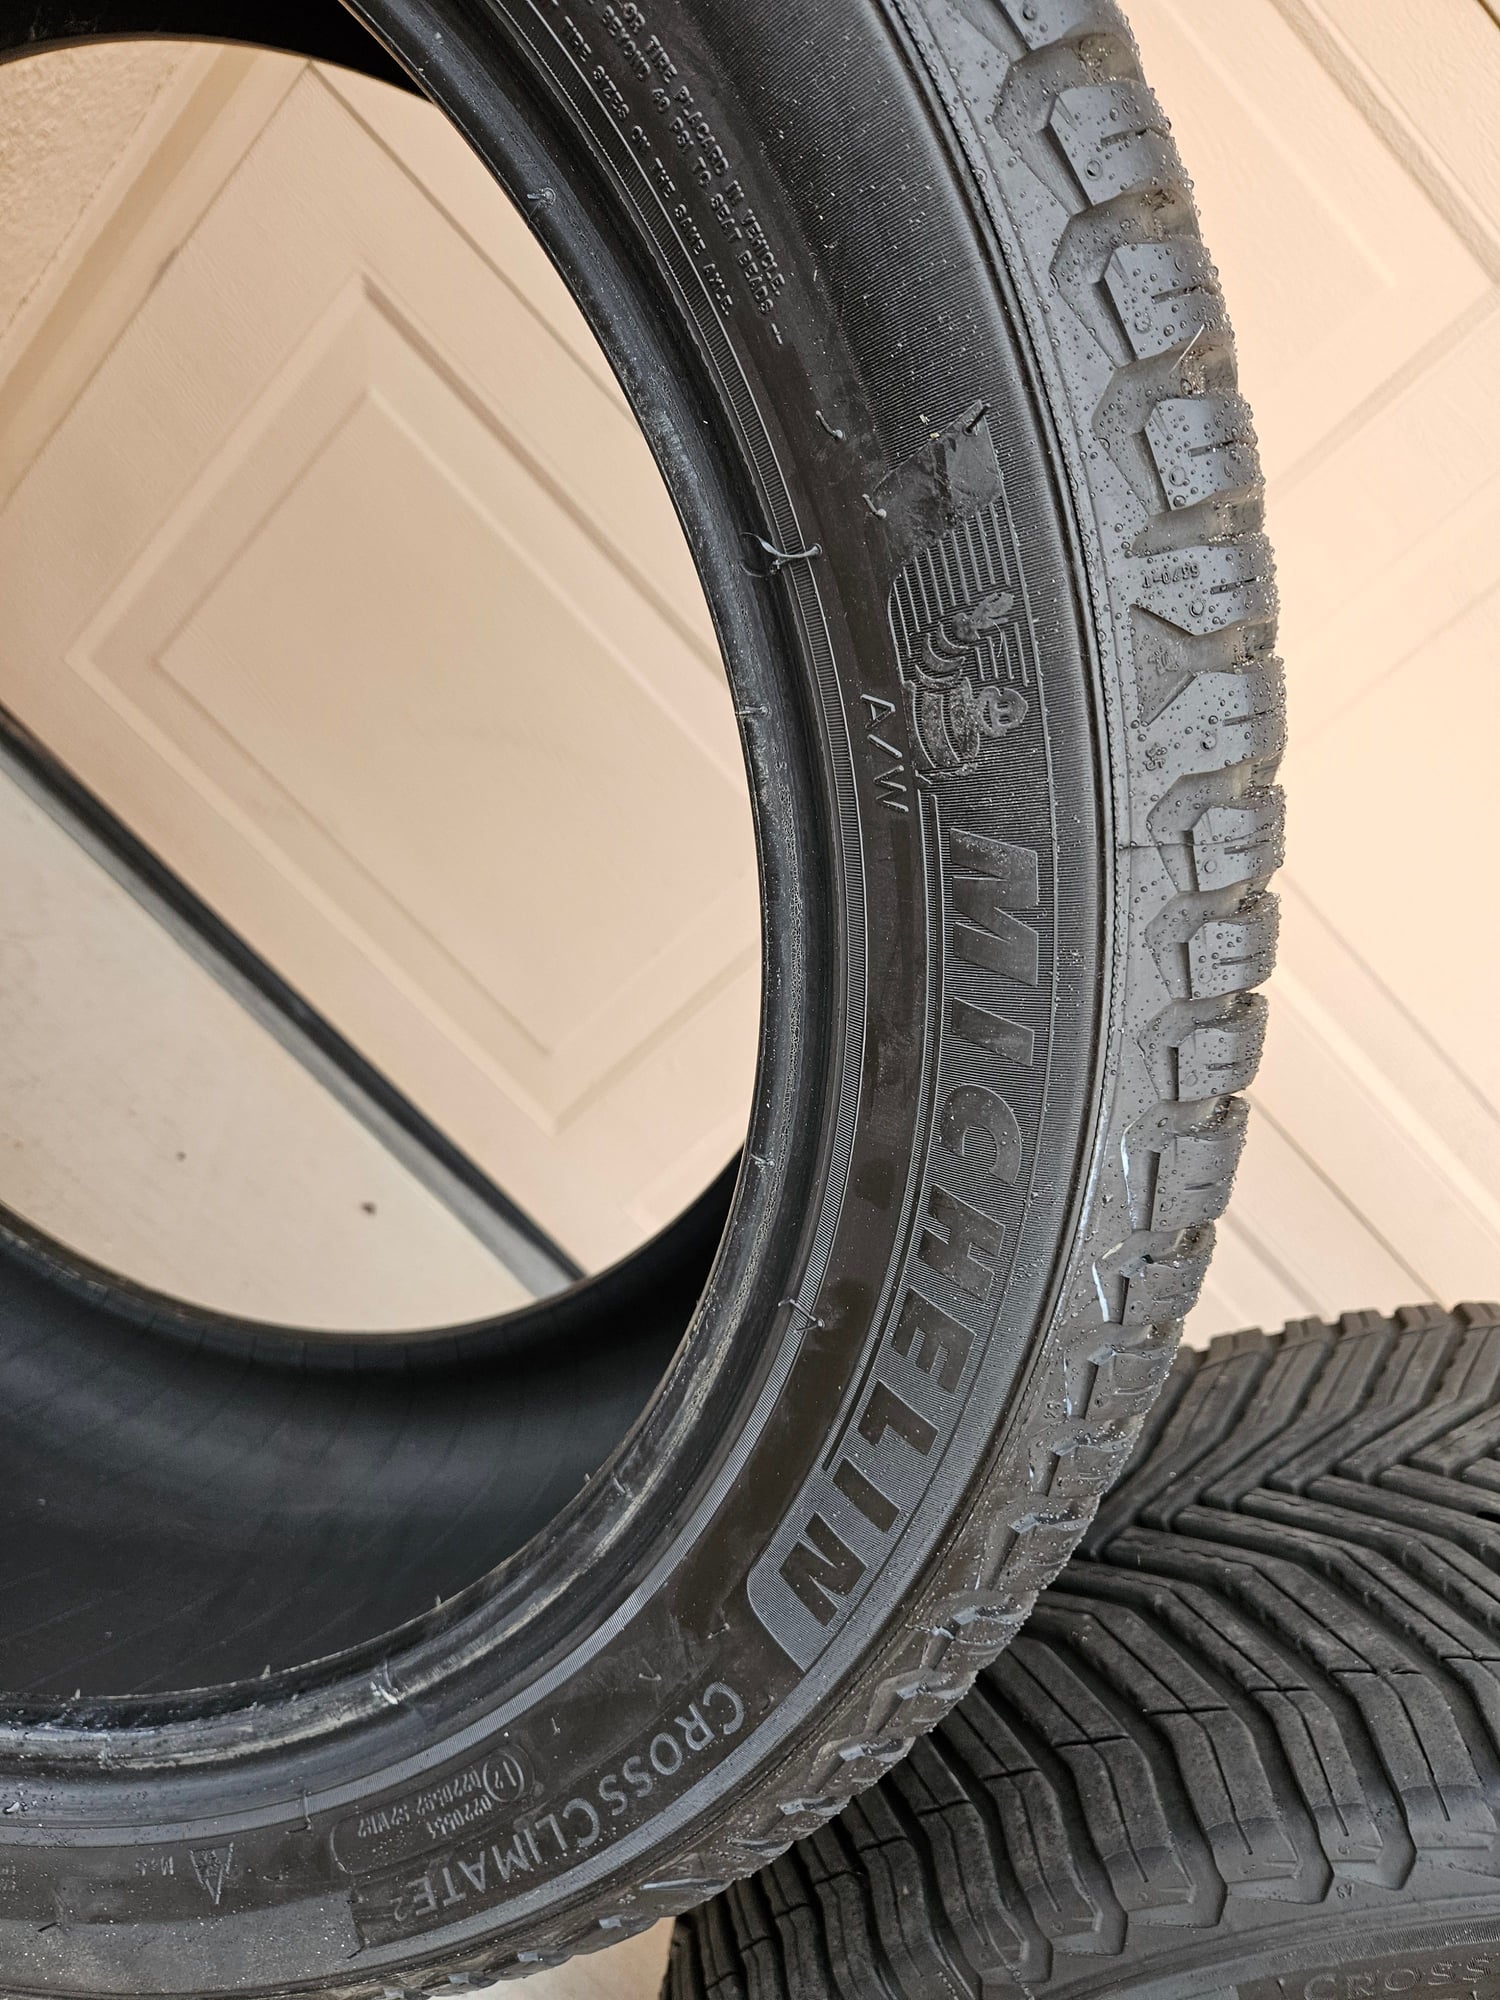 Wheels and Tires/Axles - Ditch the RUNFLATS! For Sale Michelin Crosscountry2 (2) 285/40 R20 & (2) 255/45R20 - Used - 0  All Models - Tucson, AZ 85750, United States